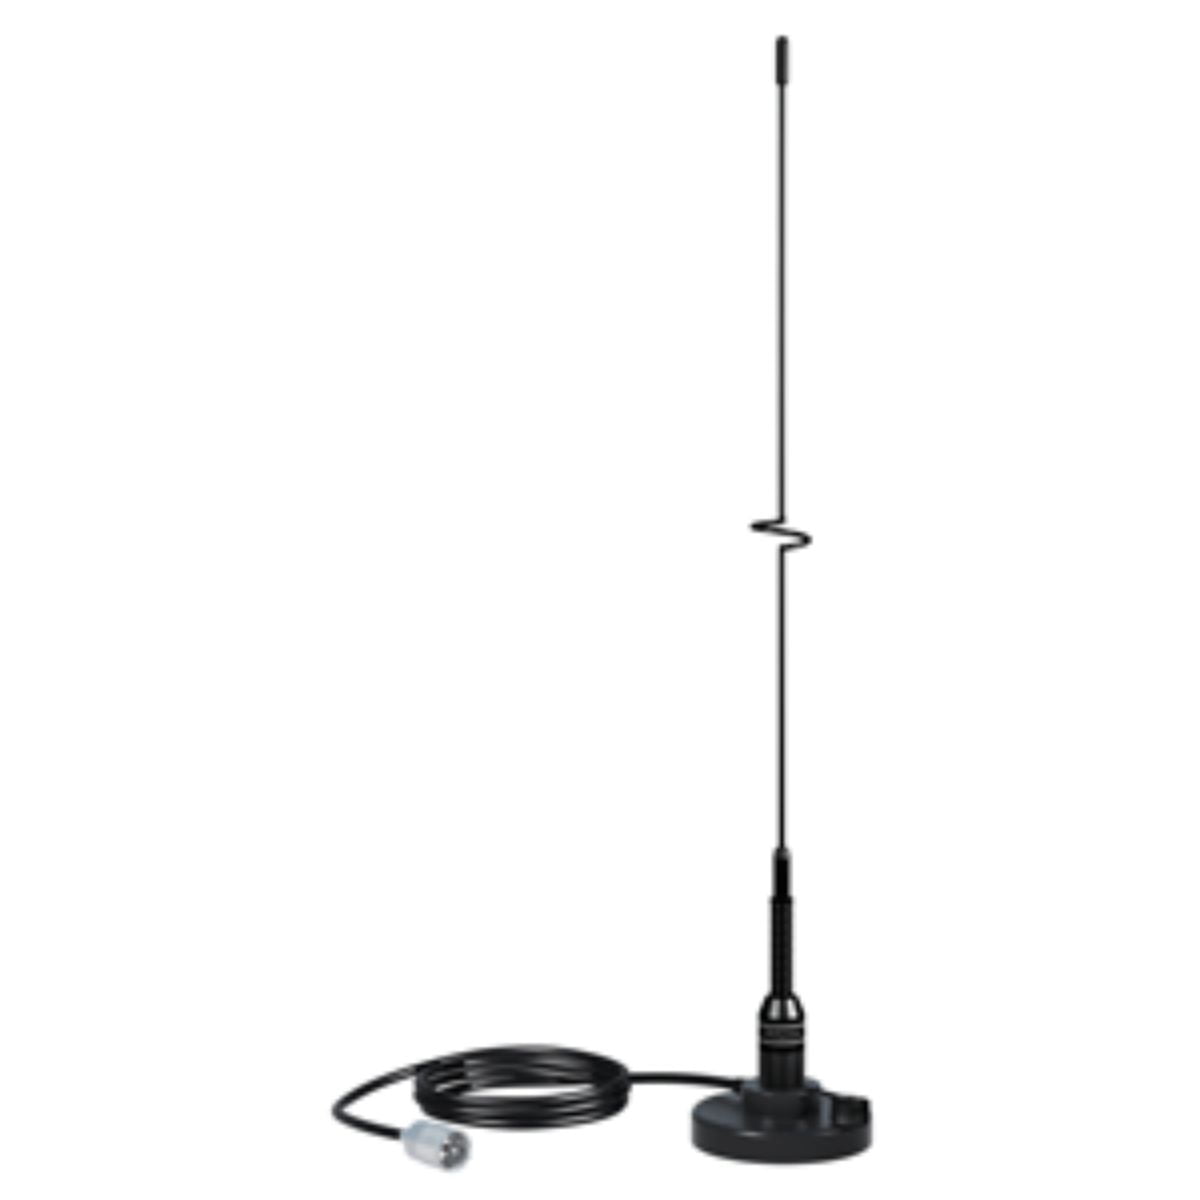 21 Black Vhf Whip Marine Antenna With Magnetic Mount